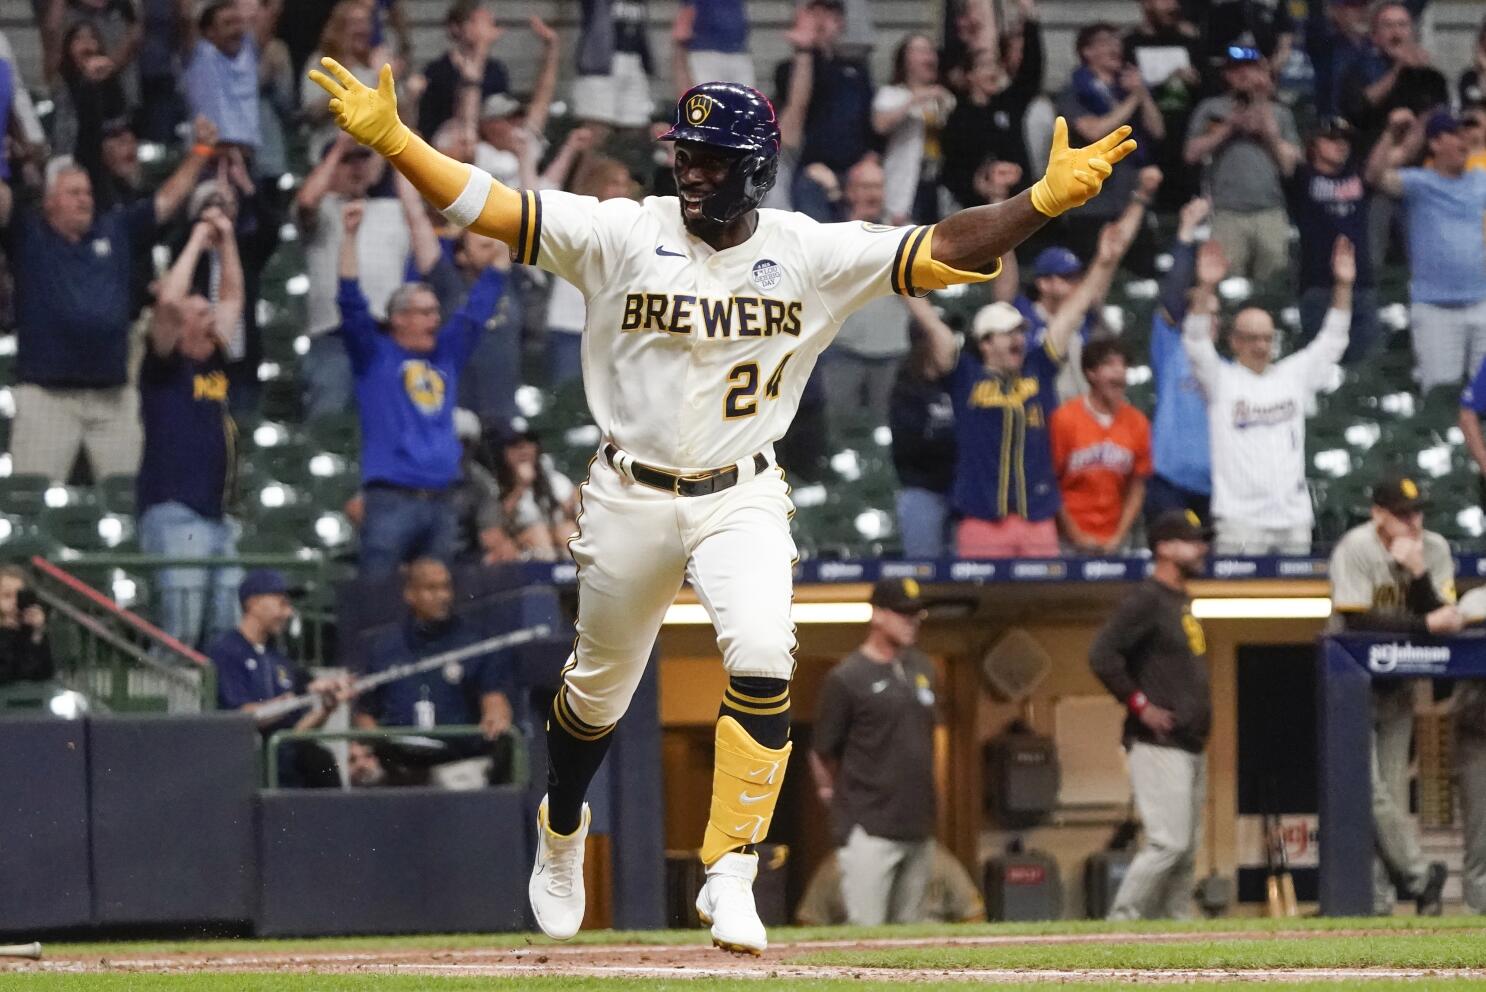 Brewers rally for 4 runs in 9th inning to stun Padres 5-4 - The